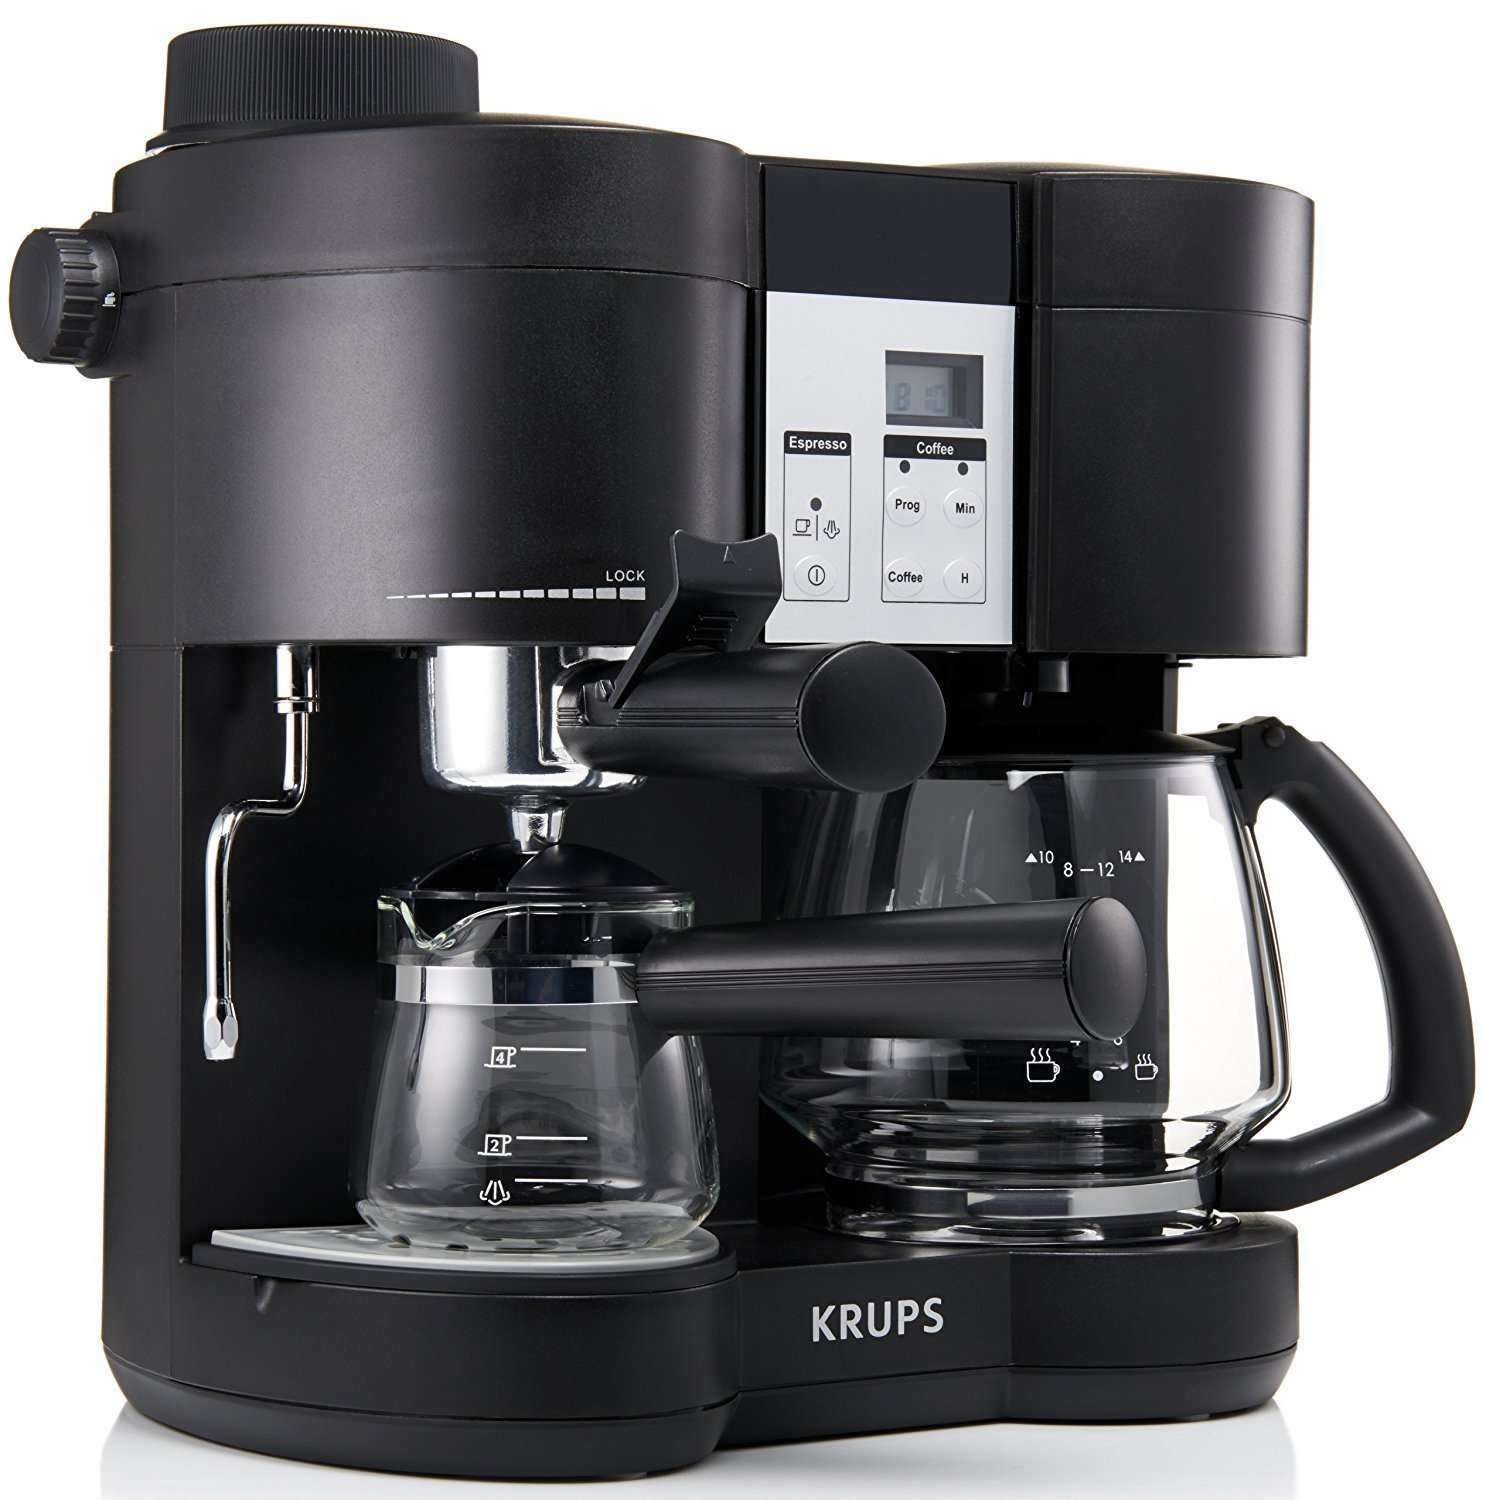 The 5 Best Espresso & Coffee Maker Combos to Buy in 2019